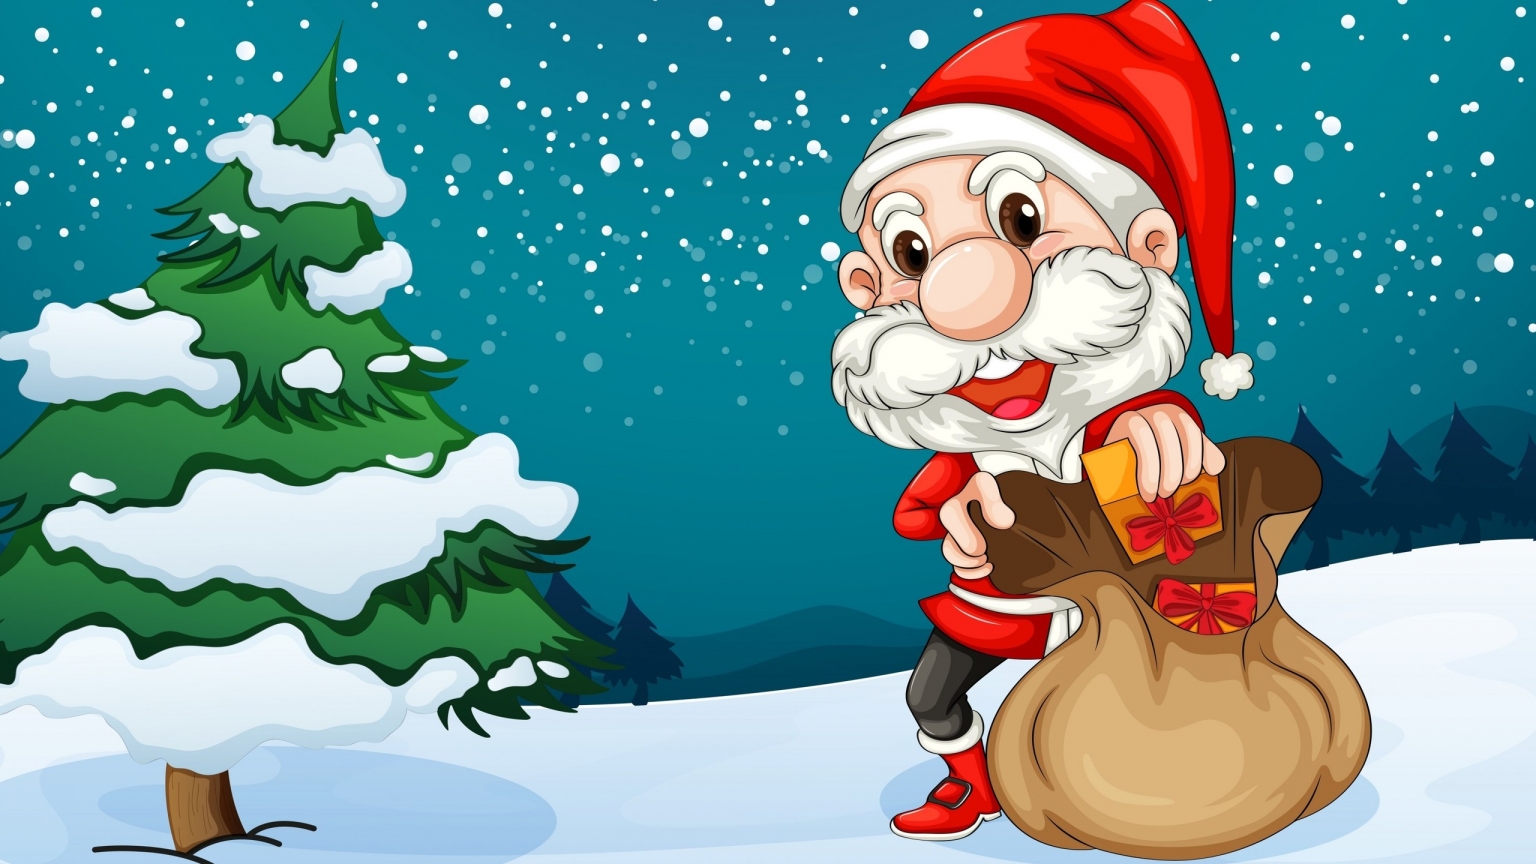 The Happiest Santa for 1536 x 864 HDTV resolution